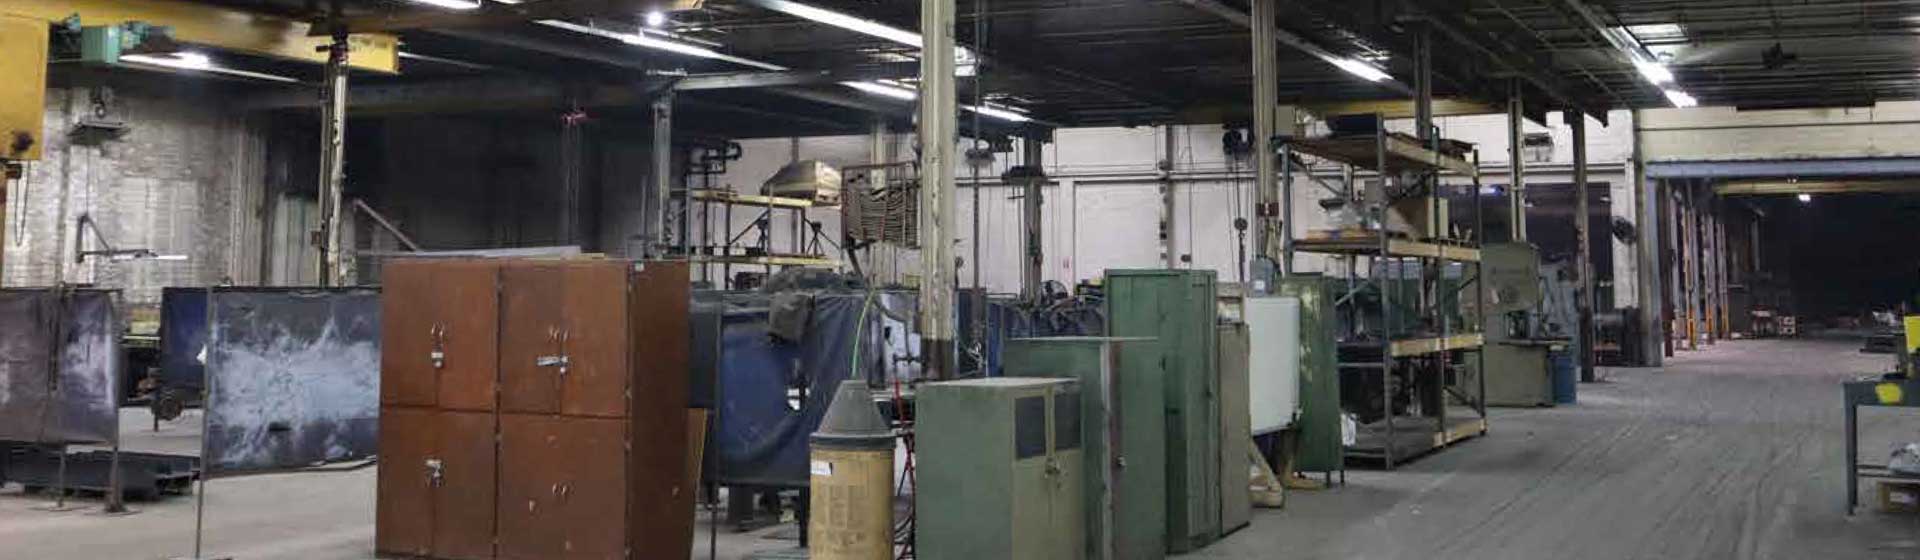 Wide angle photo of West Point Industries fabrication shop in West Point, GA.